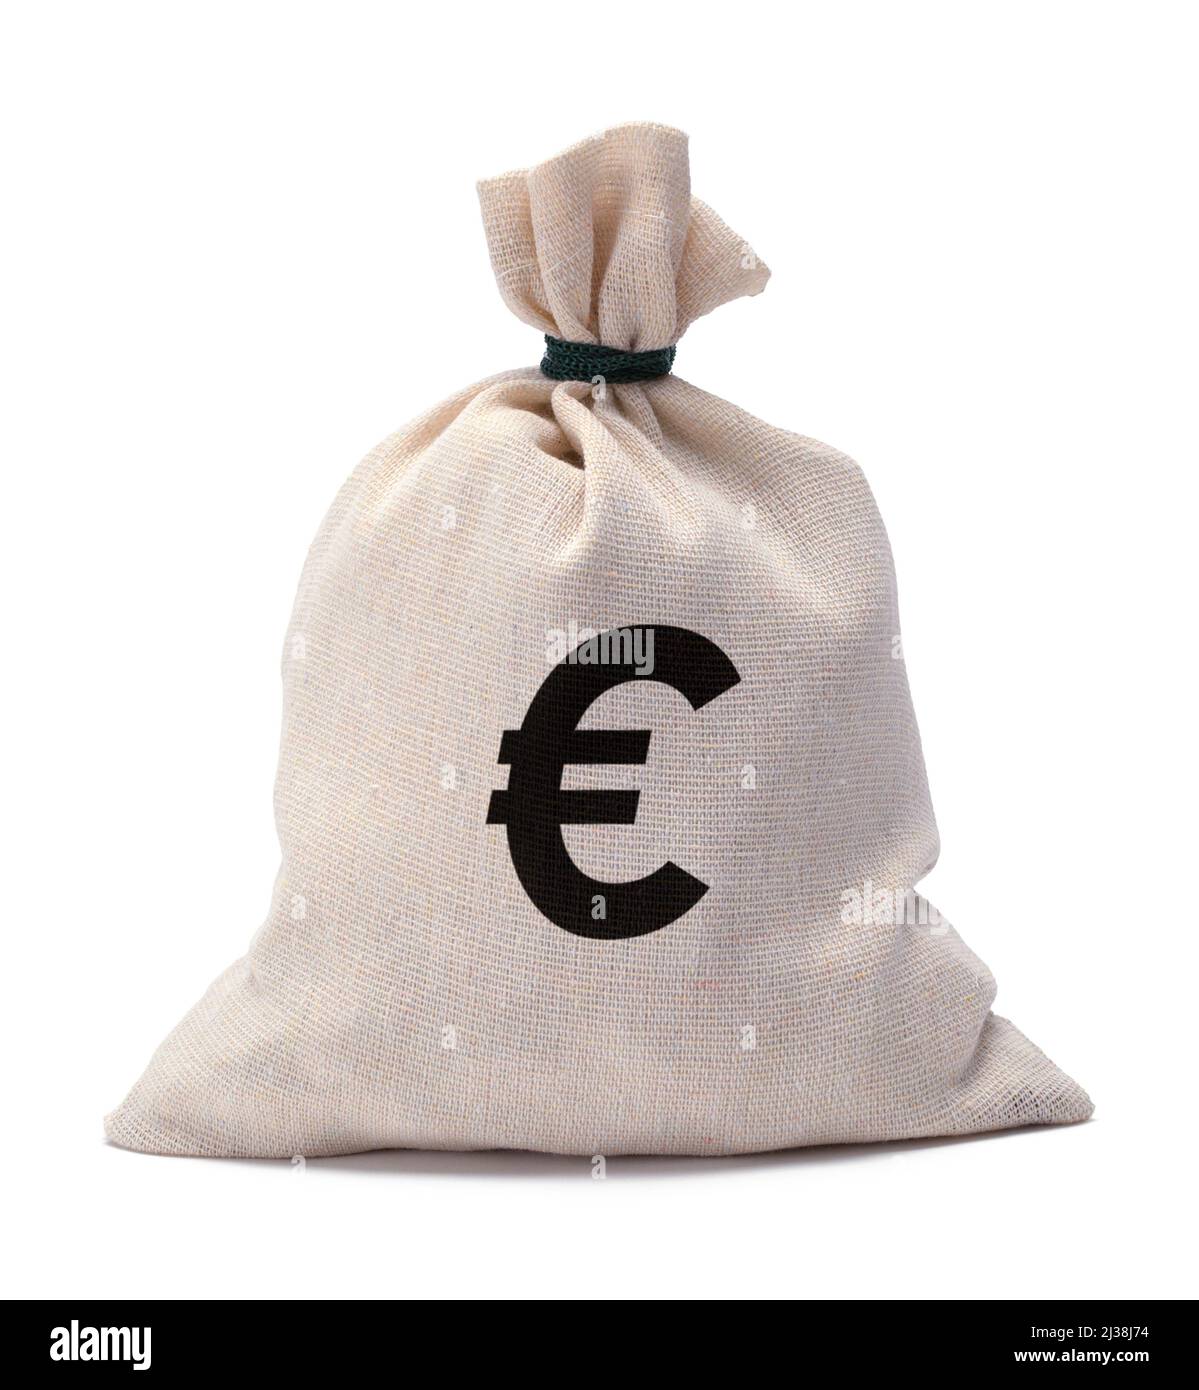 Money Bag With Euro Symbol Cut Out on White. Stock Photo